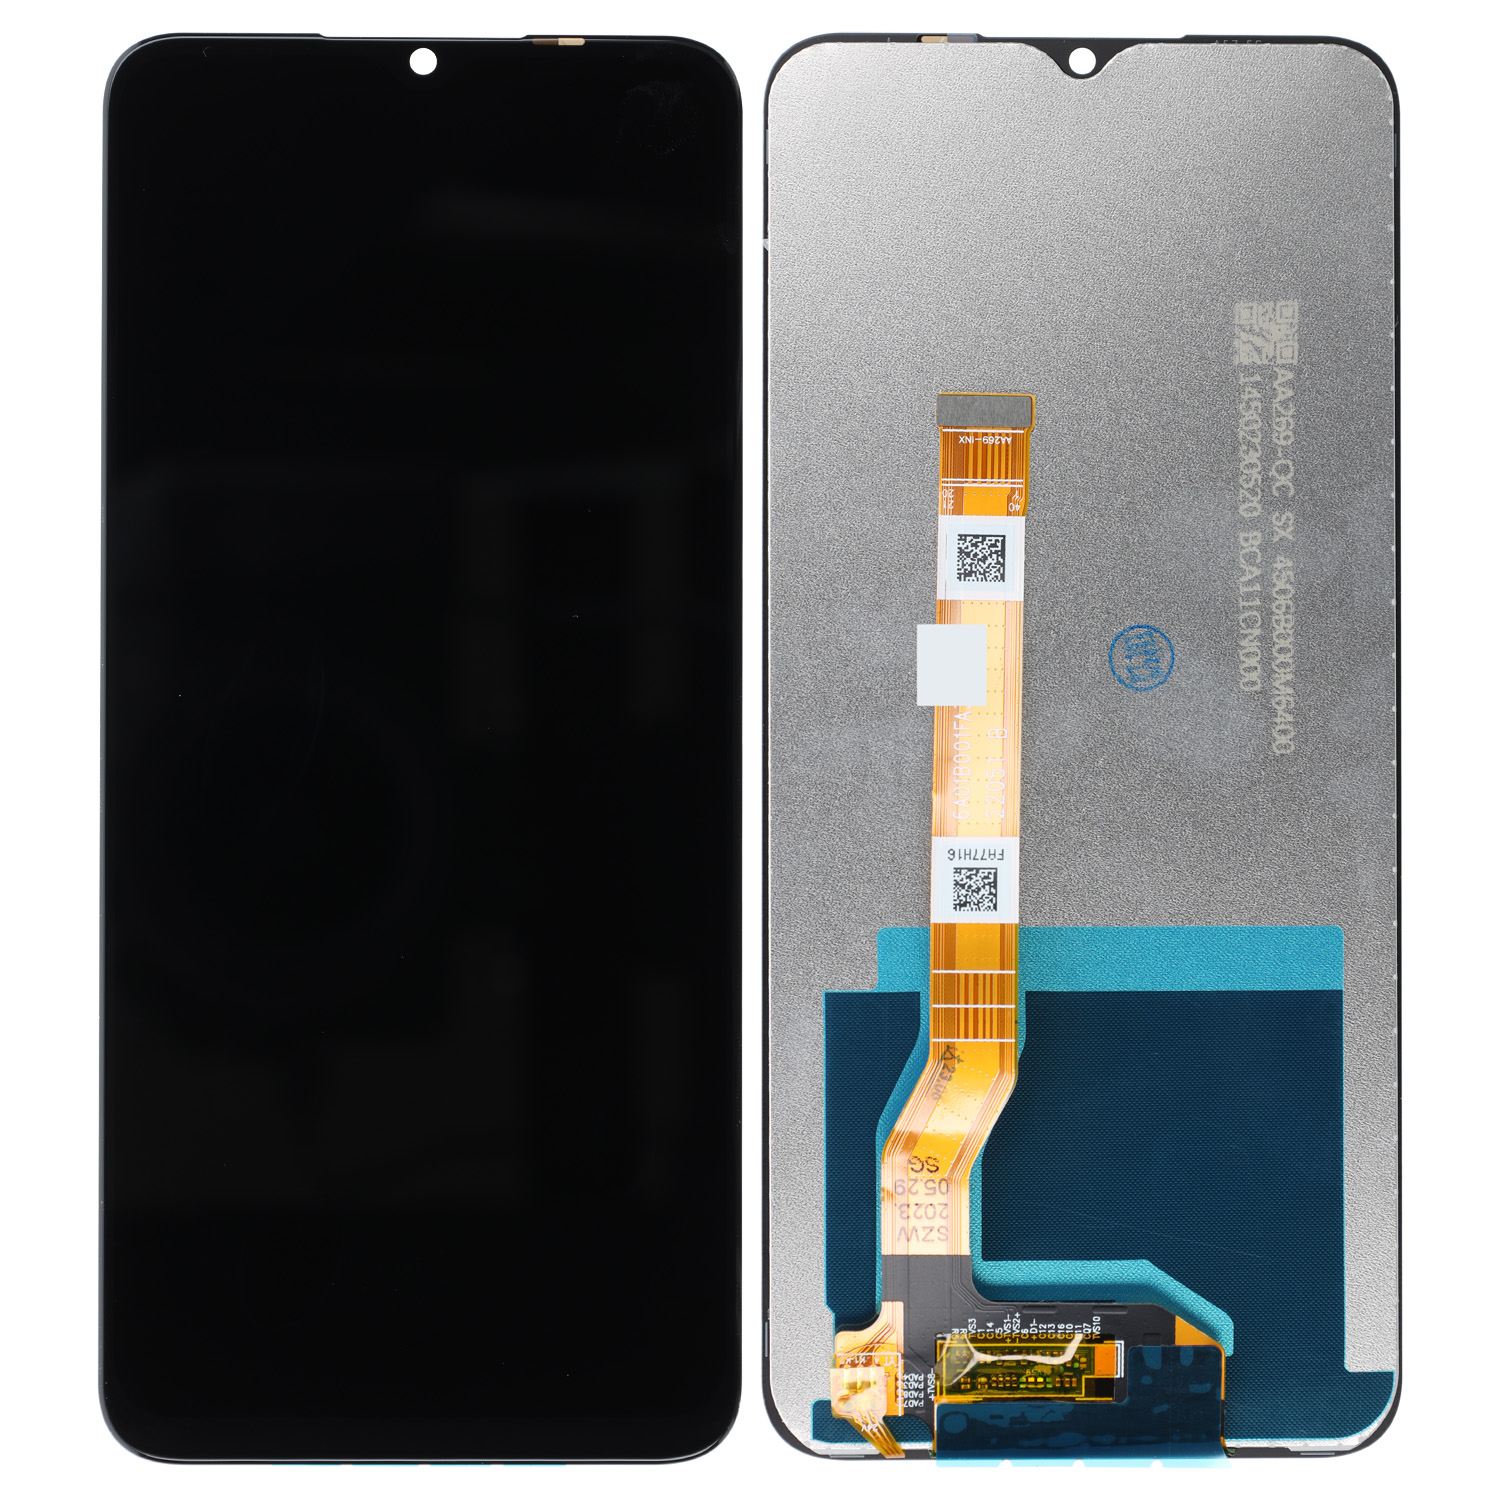 LCD Display compatible to Oppo A57, A57s, A77, A57e, A17  without Frame